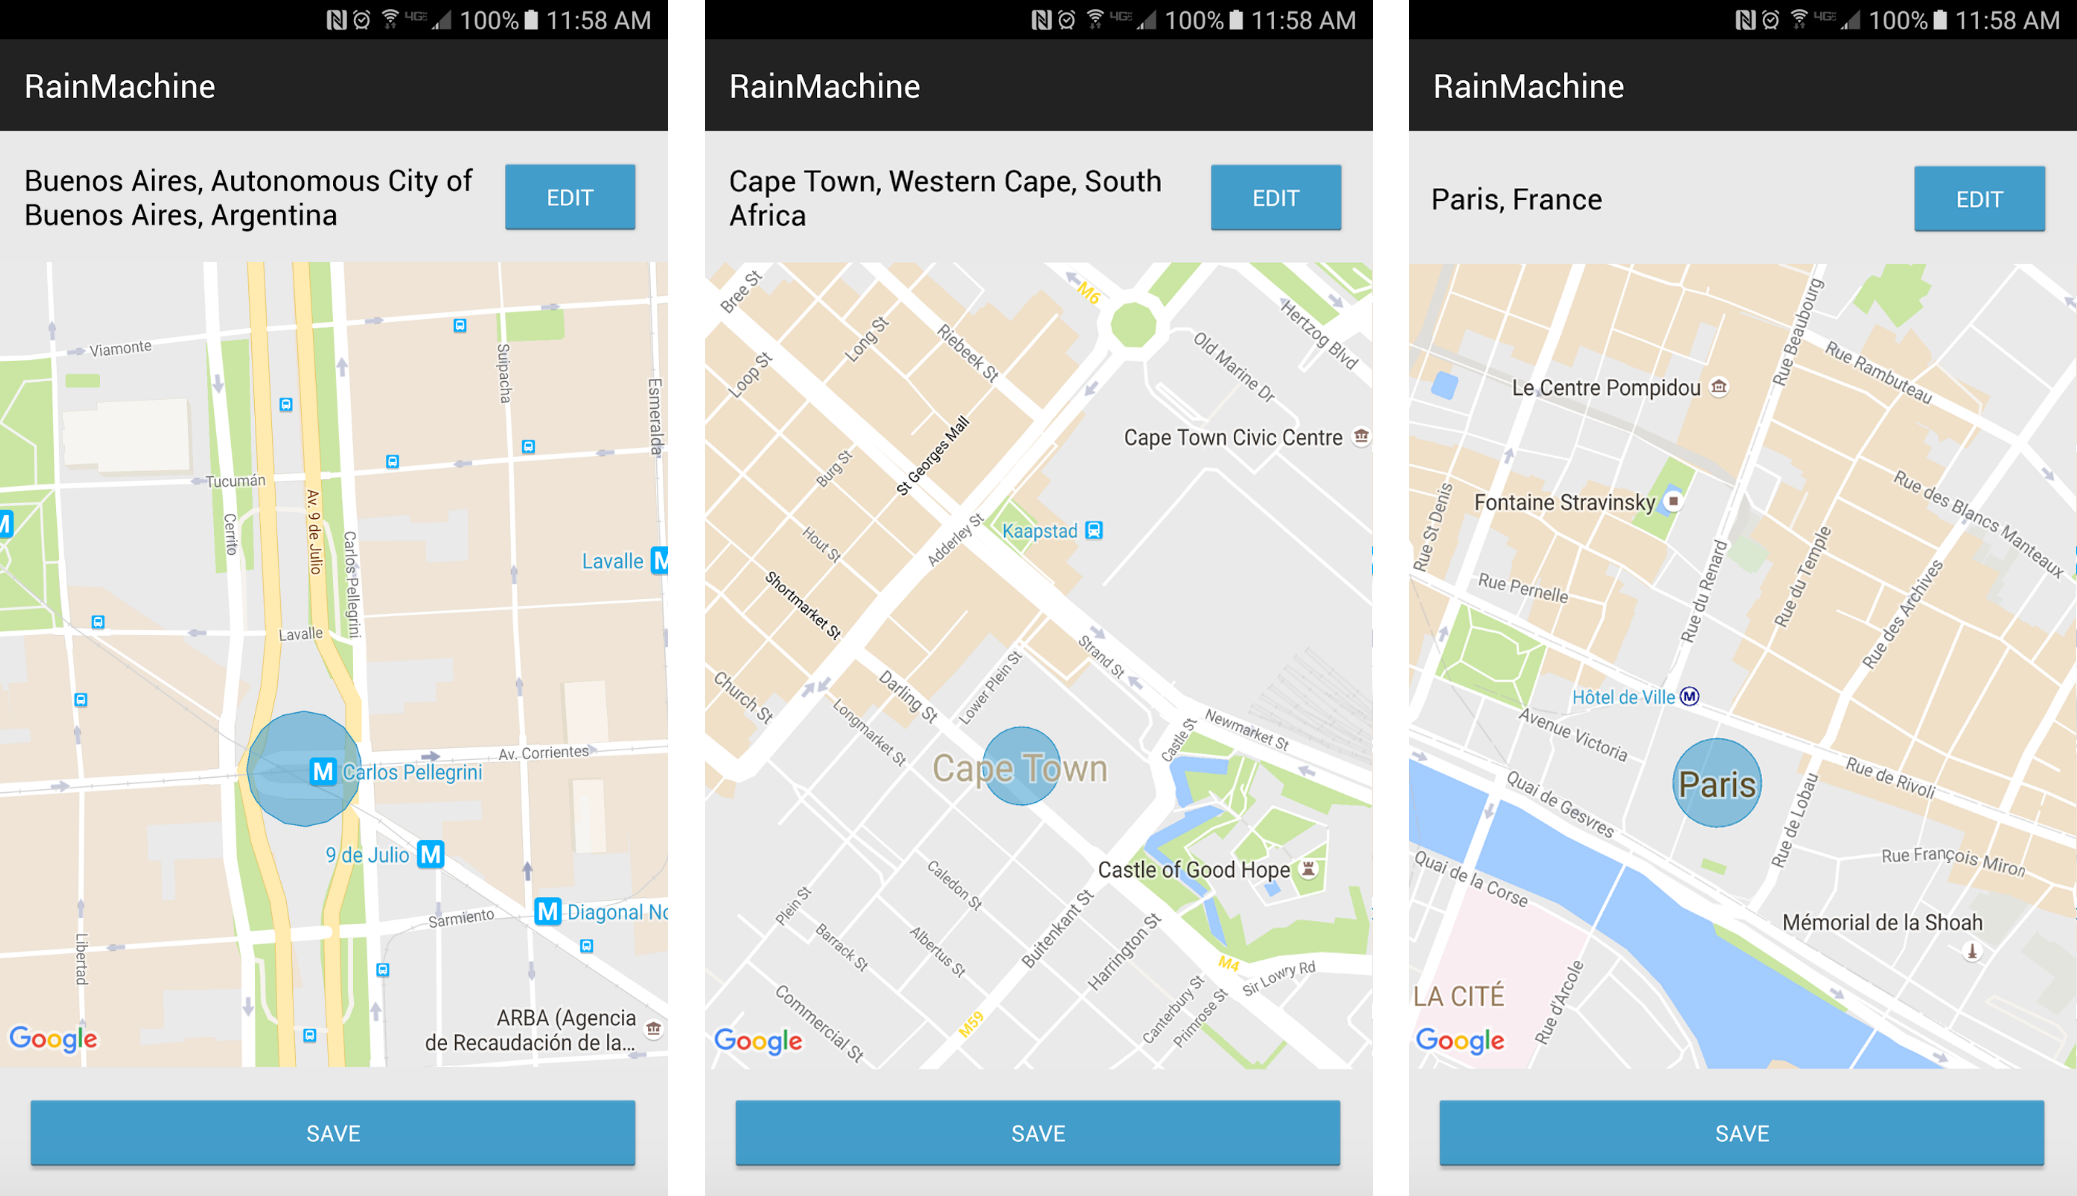 Option to choose RainMachine location by using RainMachine Android mobile application